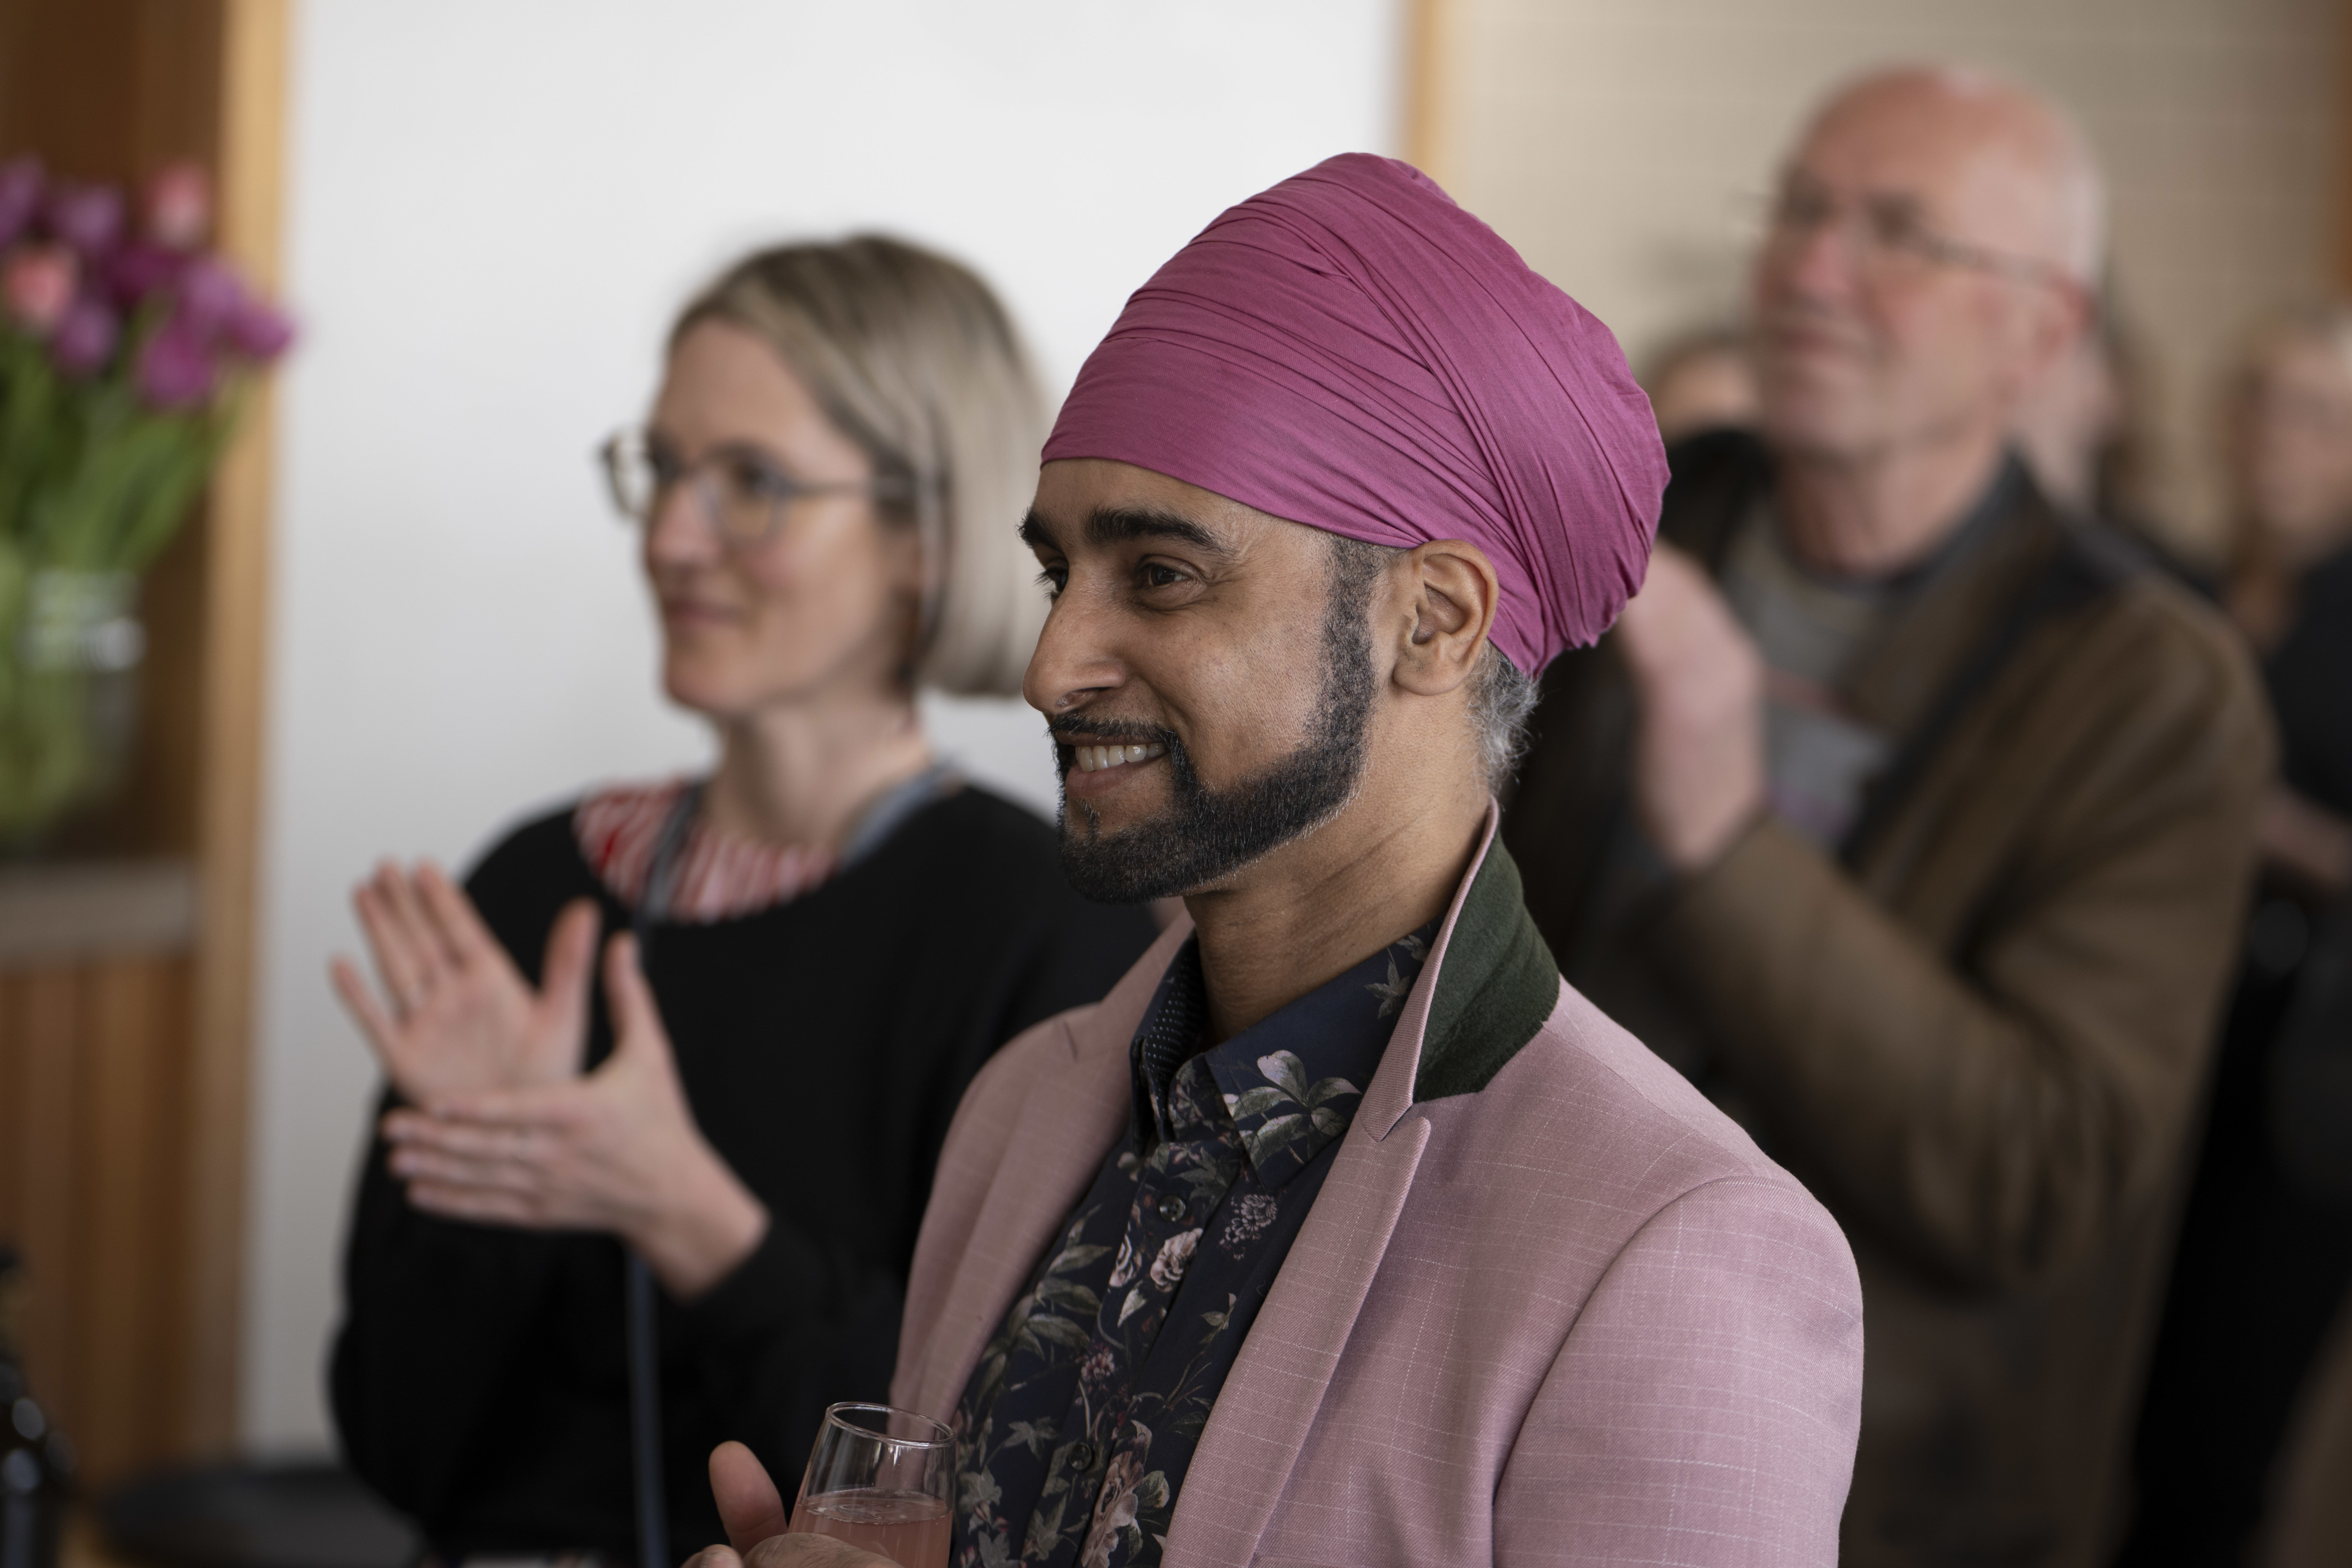 A man wearing a turban smiling with a champagne glass in his hand and a woman clapping behind him.